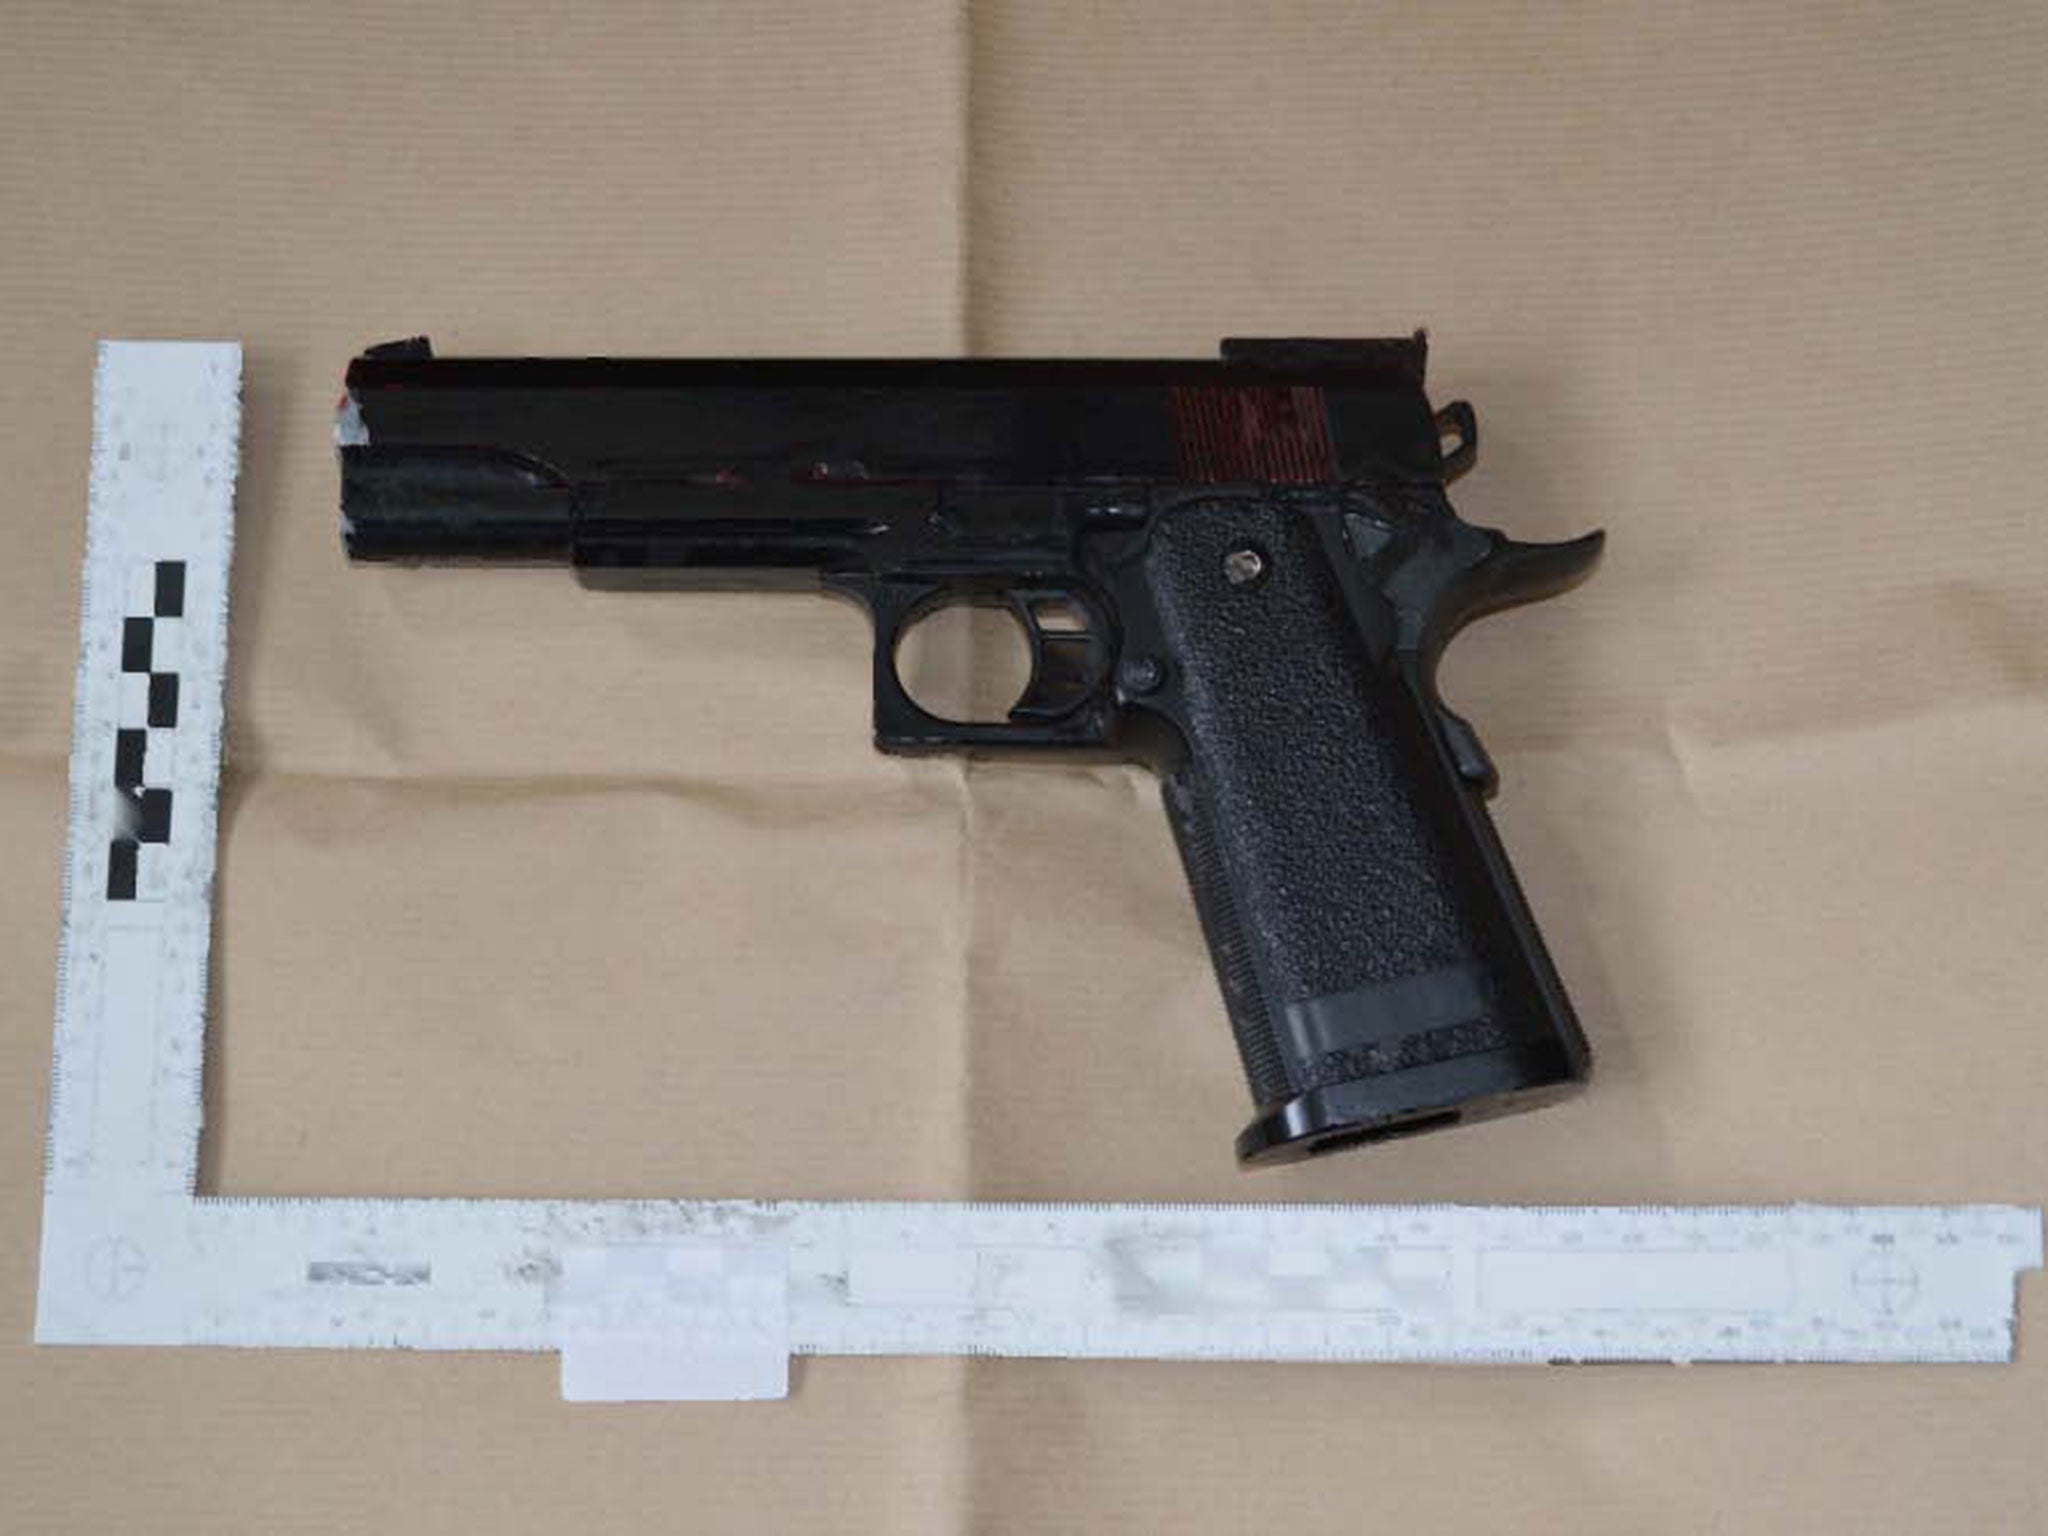 Sudesh Amman, 18, posted a photo online saying 'armed and ready' including a BB gun that had been painted black to look like a real pistol